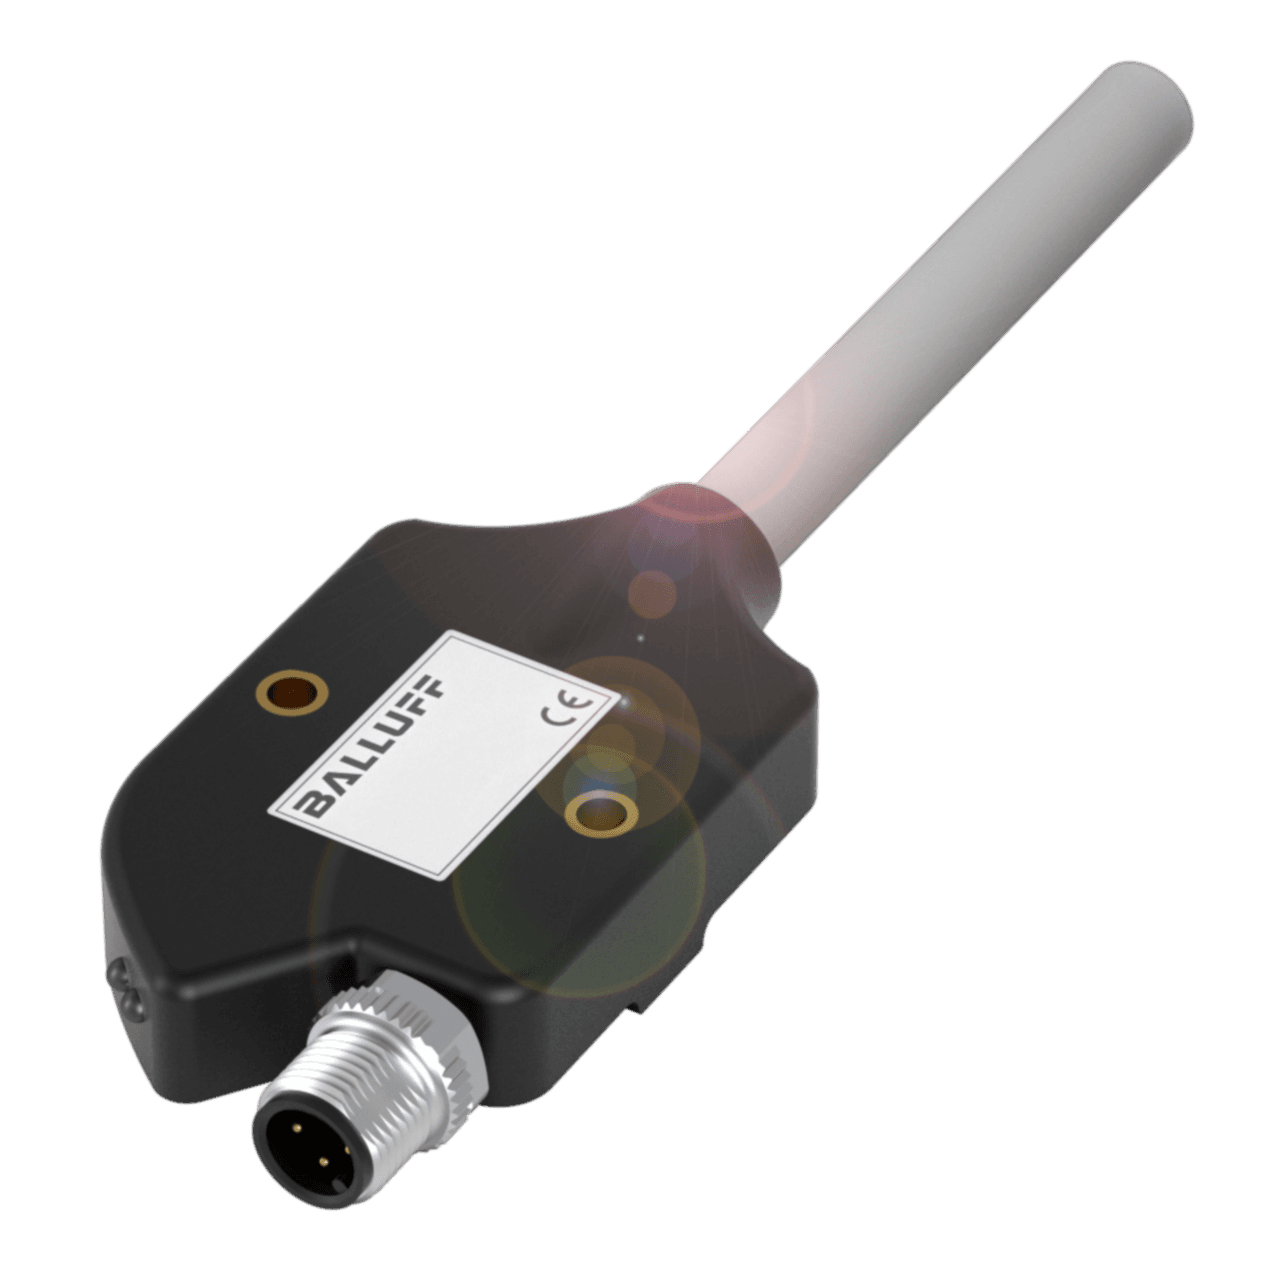 Balluff BNI005M Universal IO-Link interface, Version: Universal cable I/O interface, Interface: IO-Link 1.1, Operating voltage Ub: 18...30.2 VDC, Connection (COM 1): M12x1-Male, 5-pin, A-coded, Connection for sensor: open cable end-Leads, Cable length L: 0.5 m, Digital i